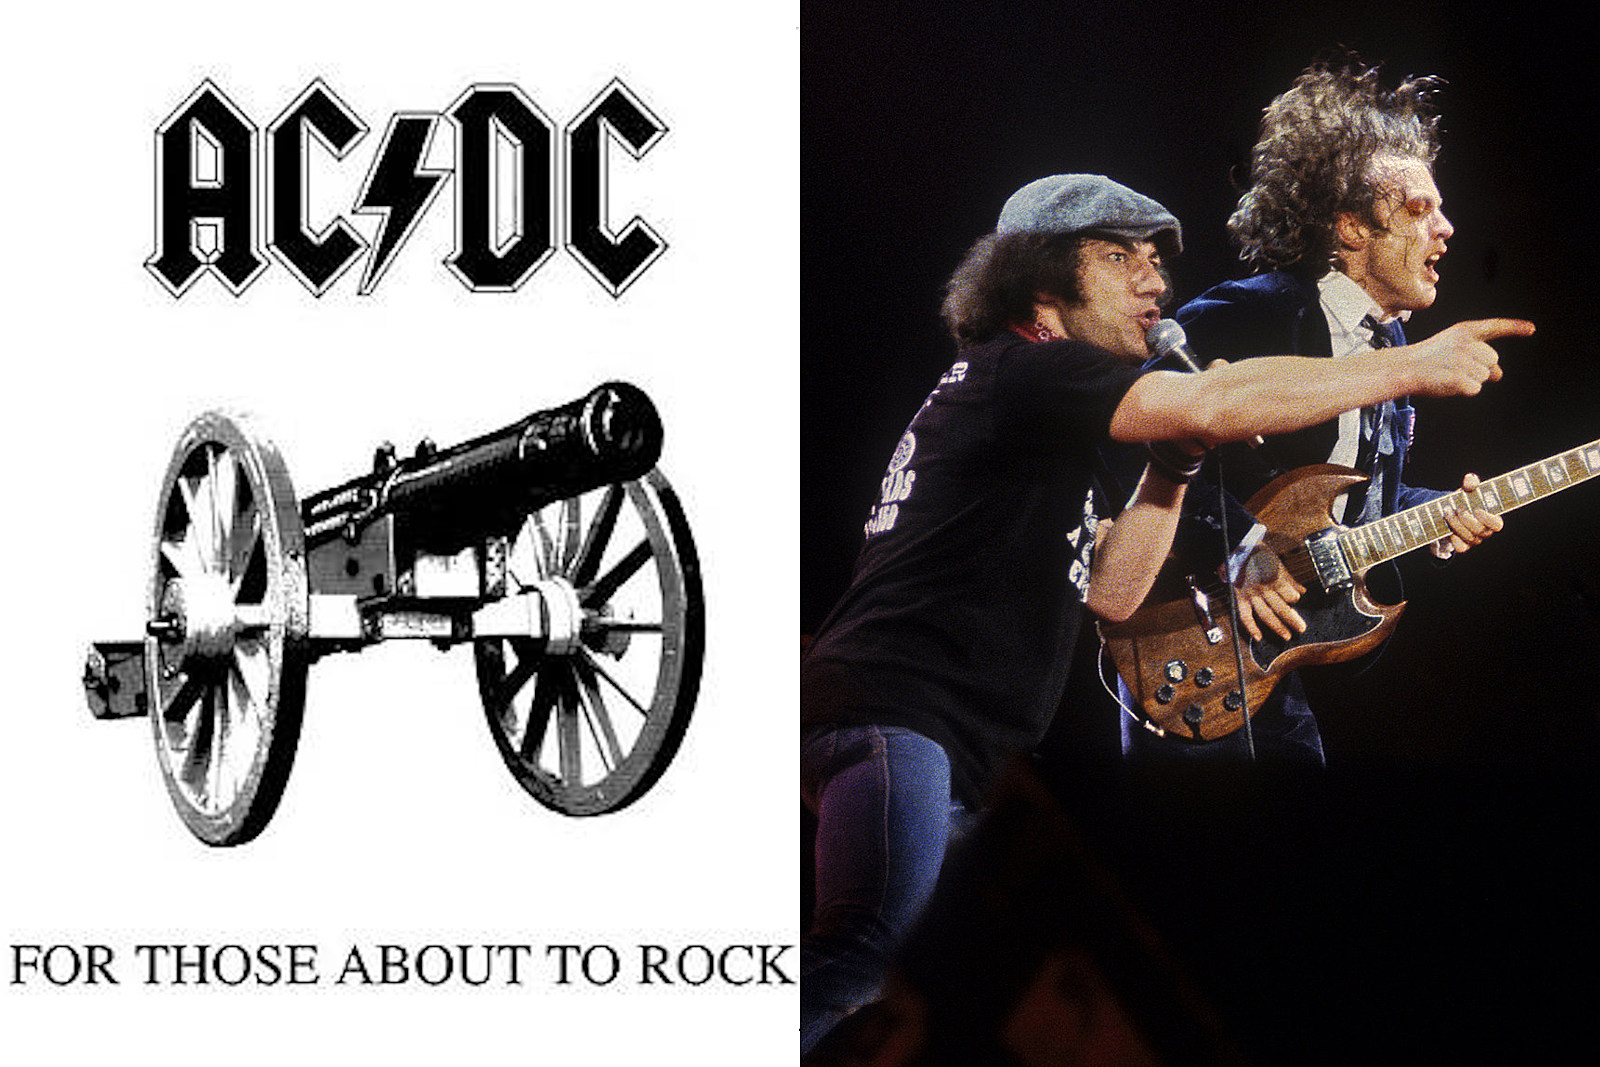 How an English Poet Inspired AC/DC's 'For Those About to Rock'